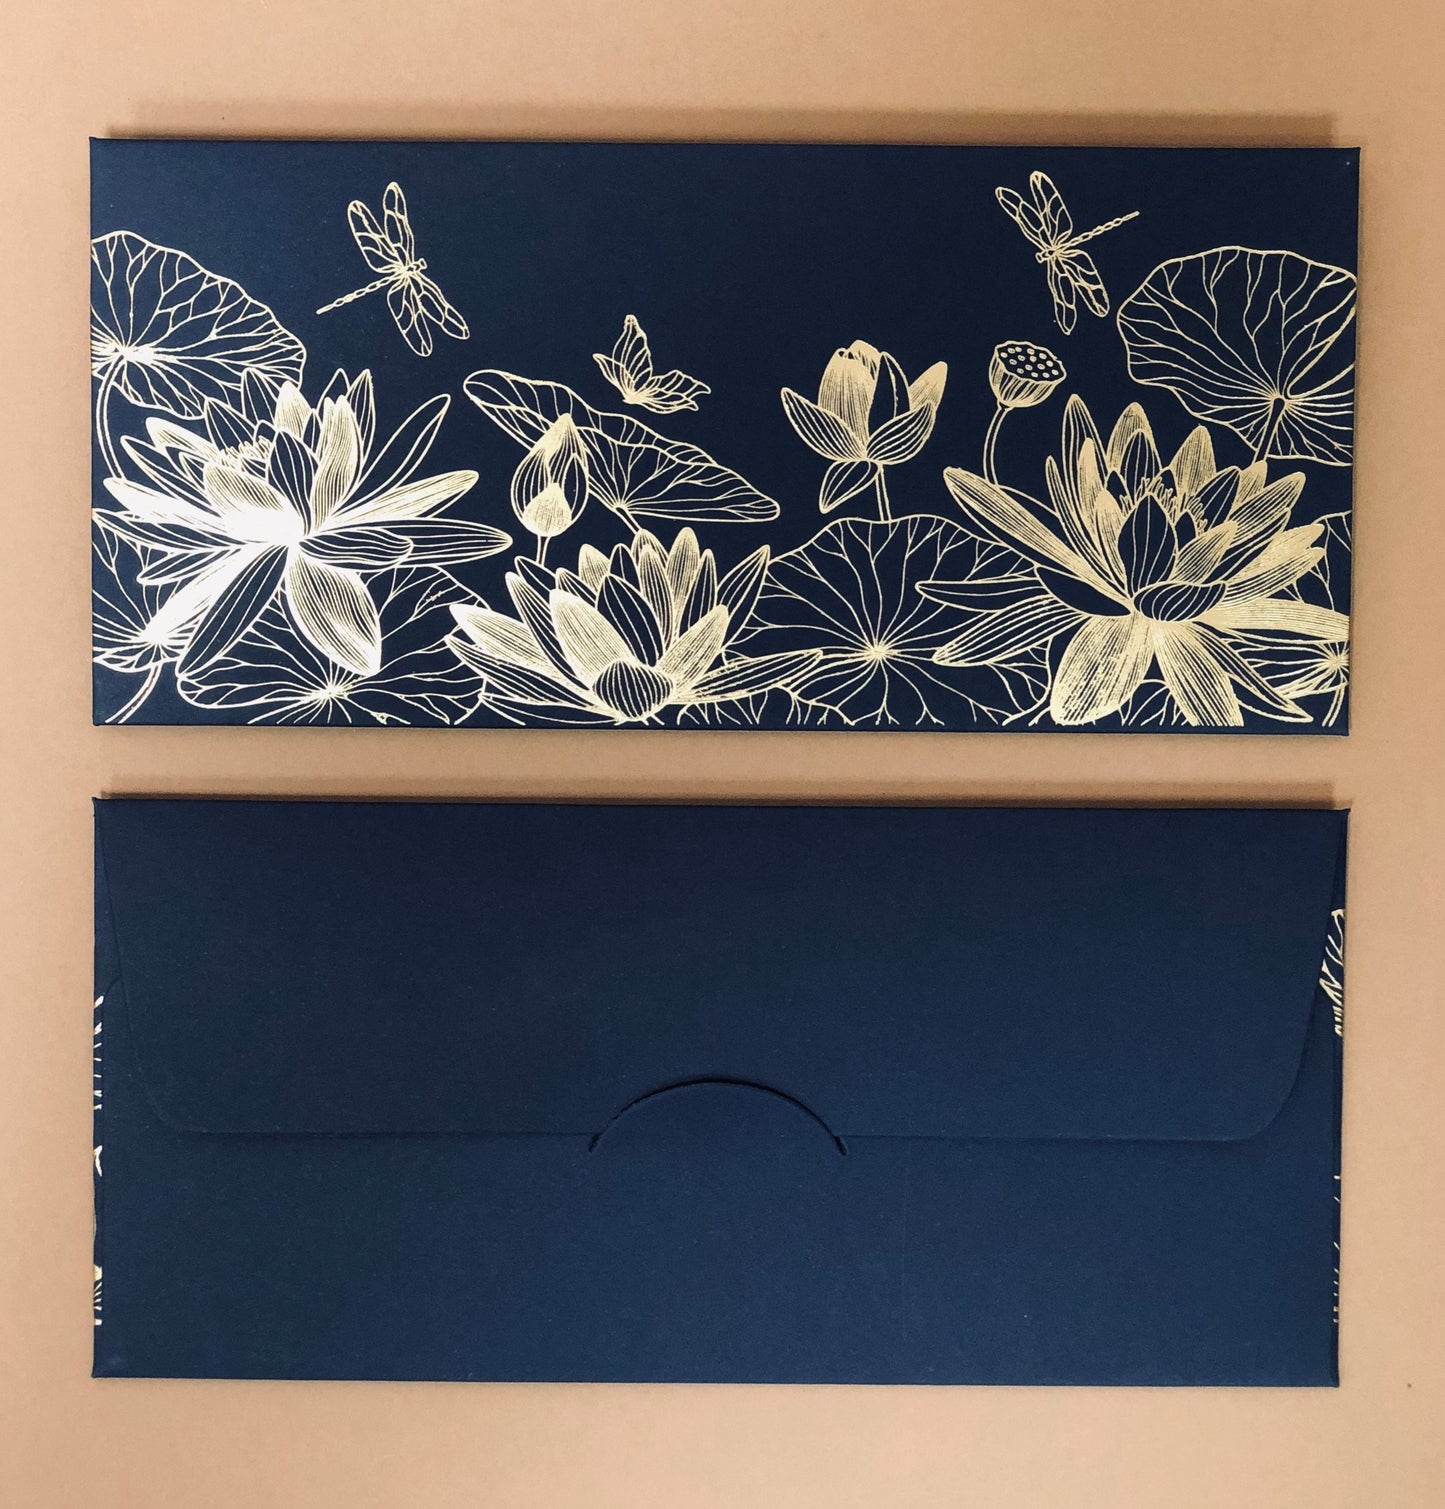 FLORAL ENVELOPE (7.5X3.5 INCHES)